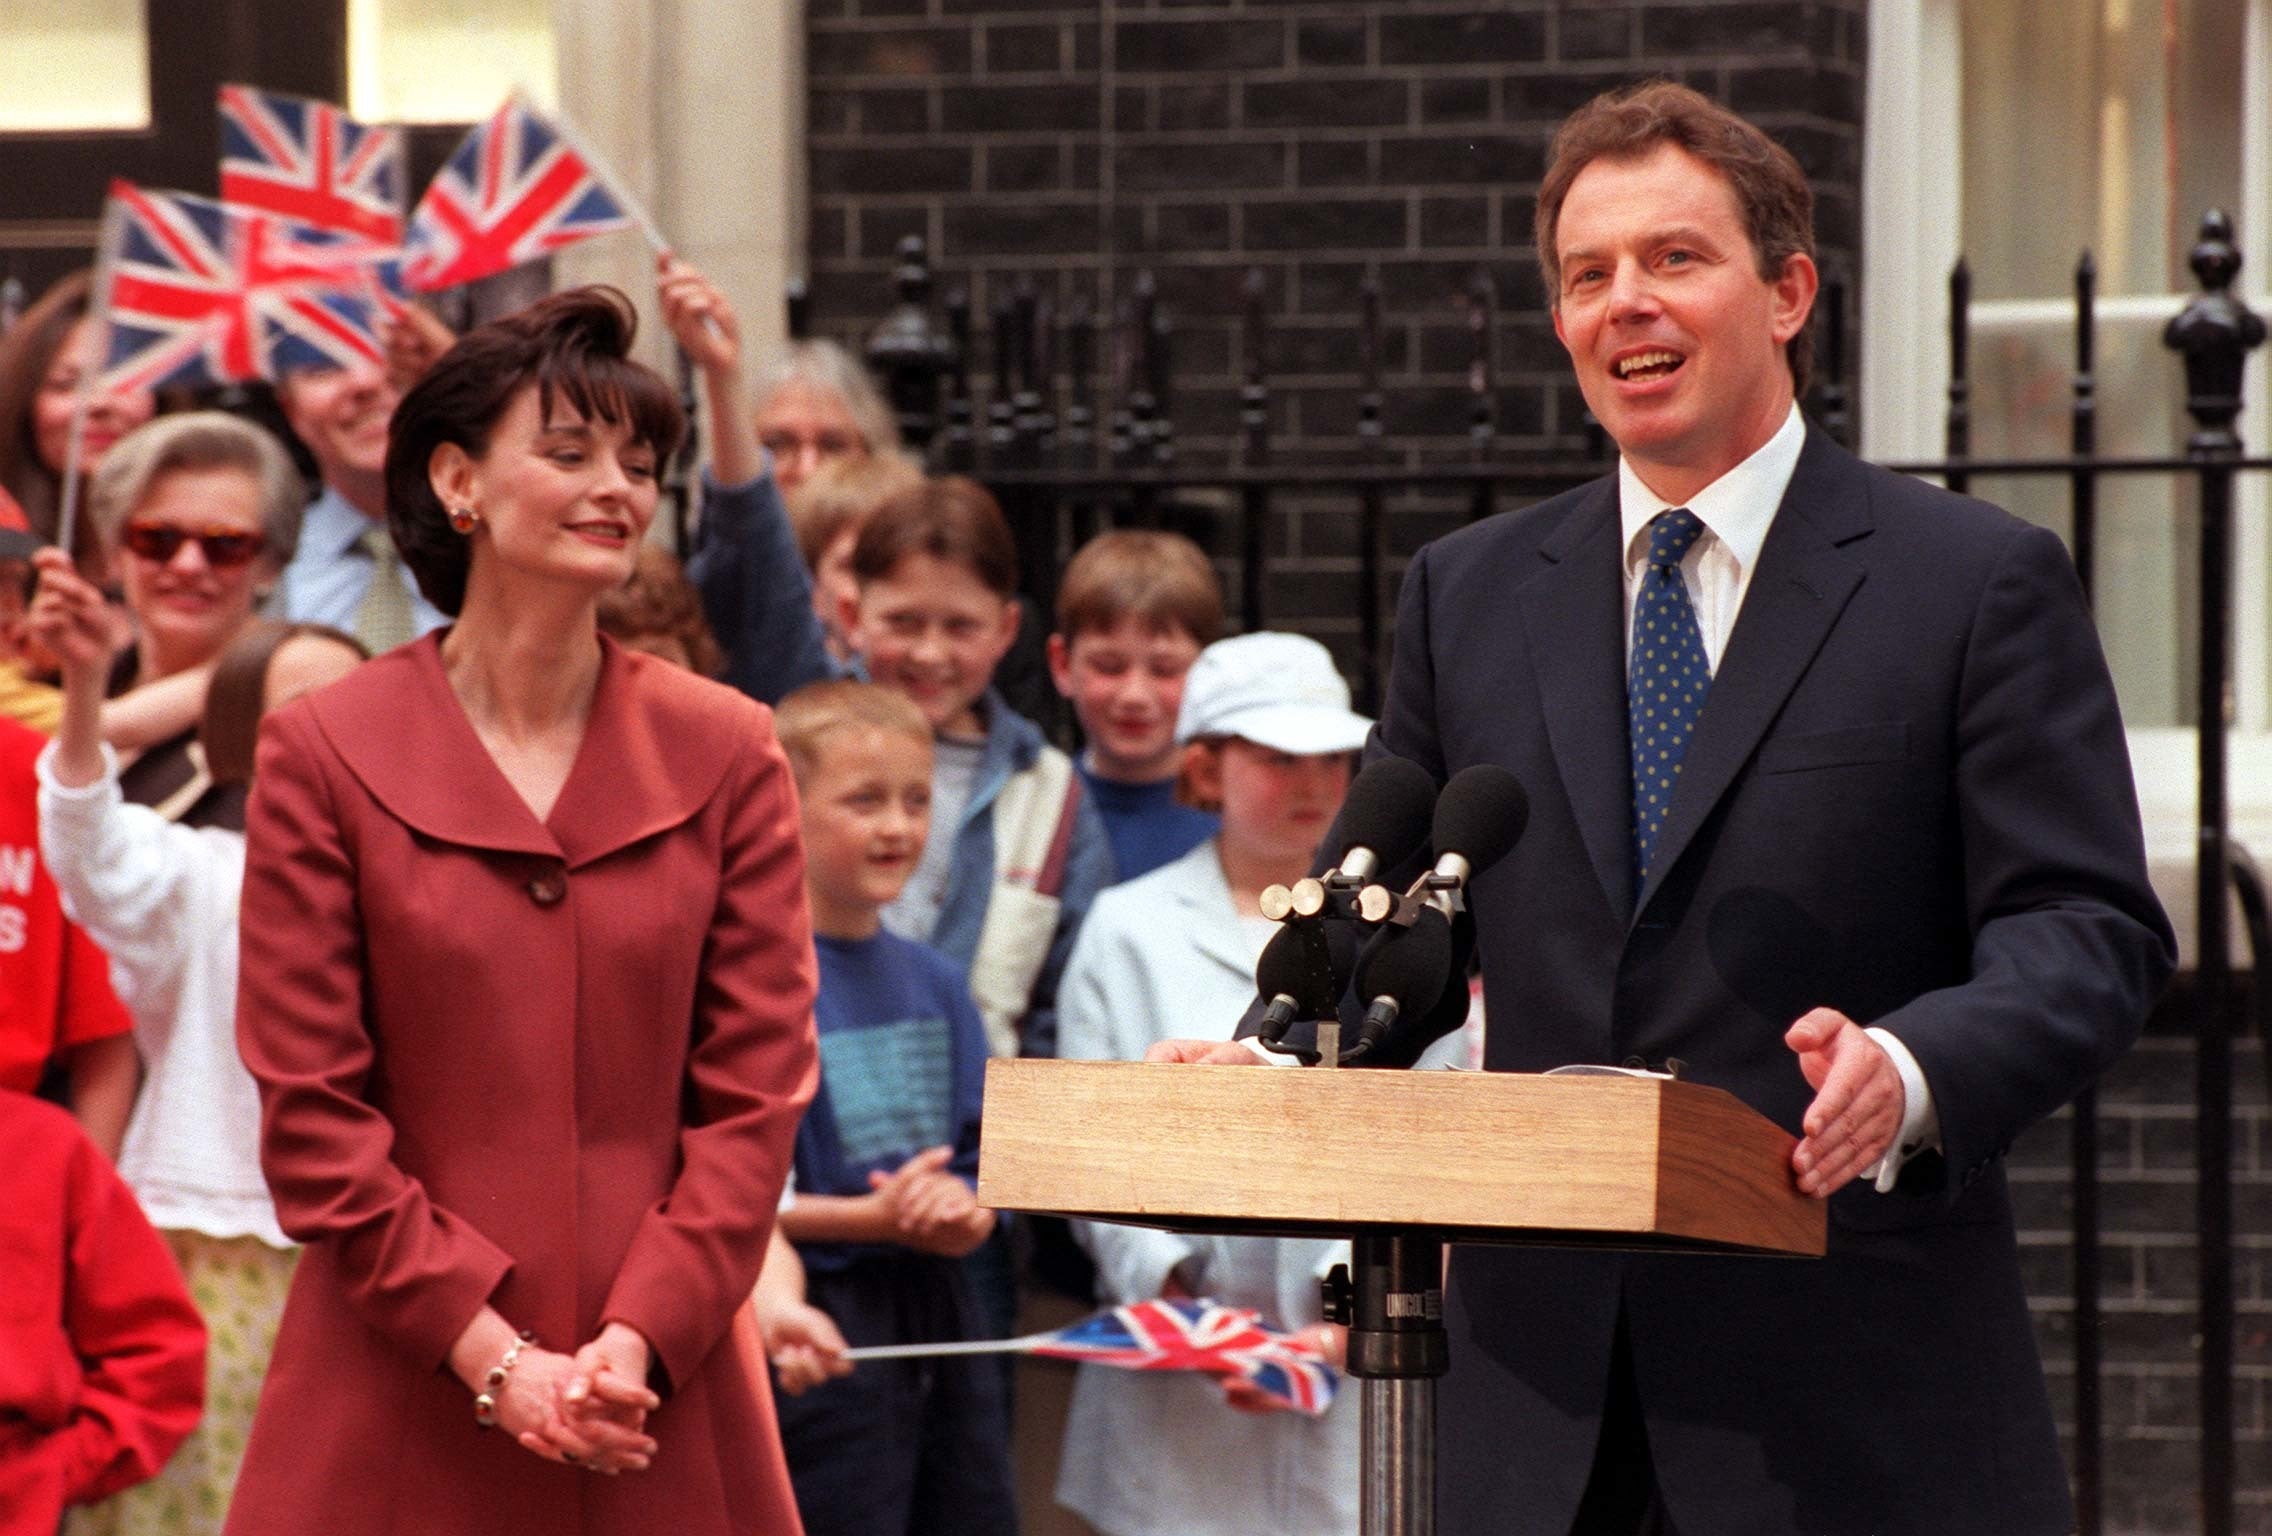 Former prime minister Tony Blair won a landslide election victory in 1997 with a huge 179-seat majority